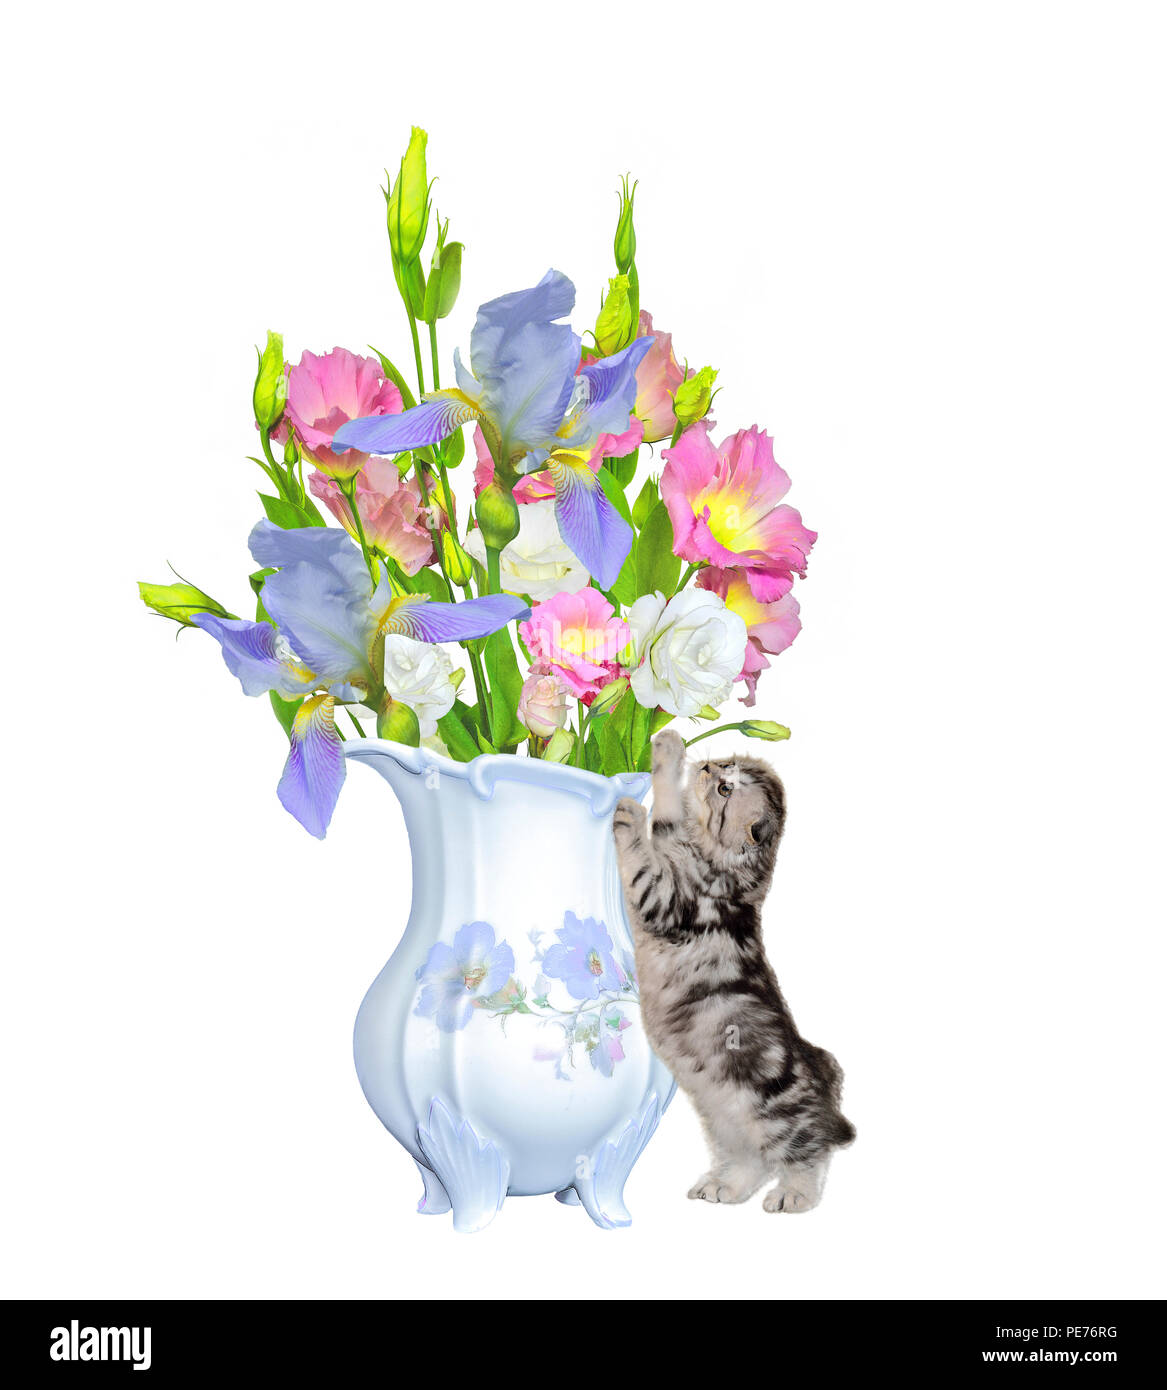 Little Kitten stands near  the antique porcelain jug and pulls paws to the beautiful bouquet of gentle lisianthus and iris flowers close up, isolated  Stock Photo